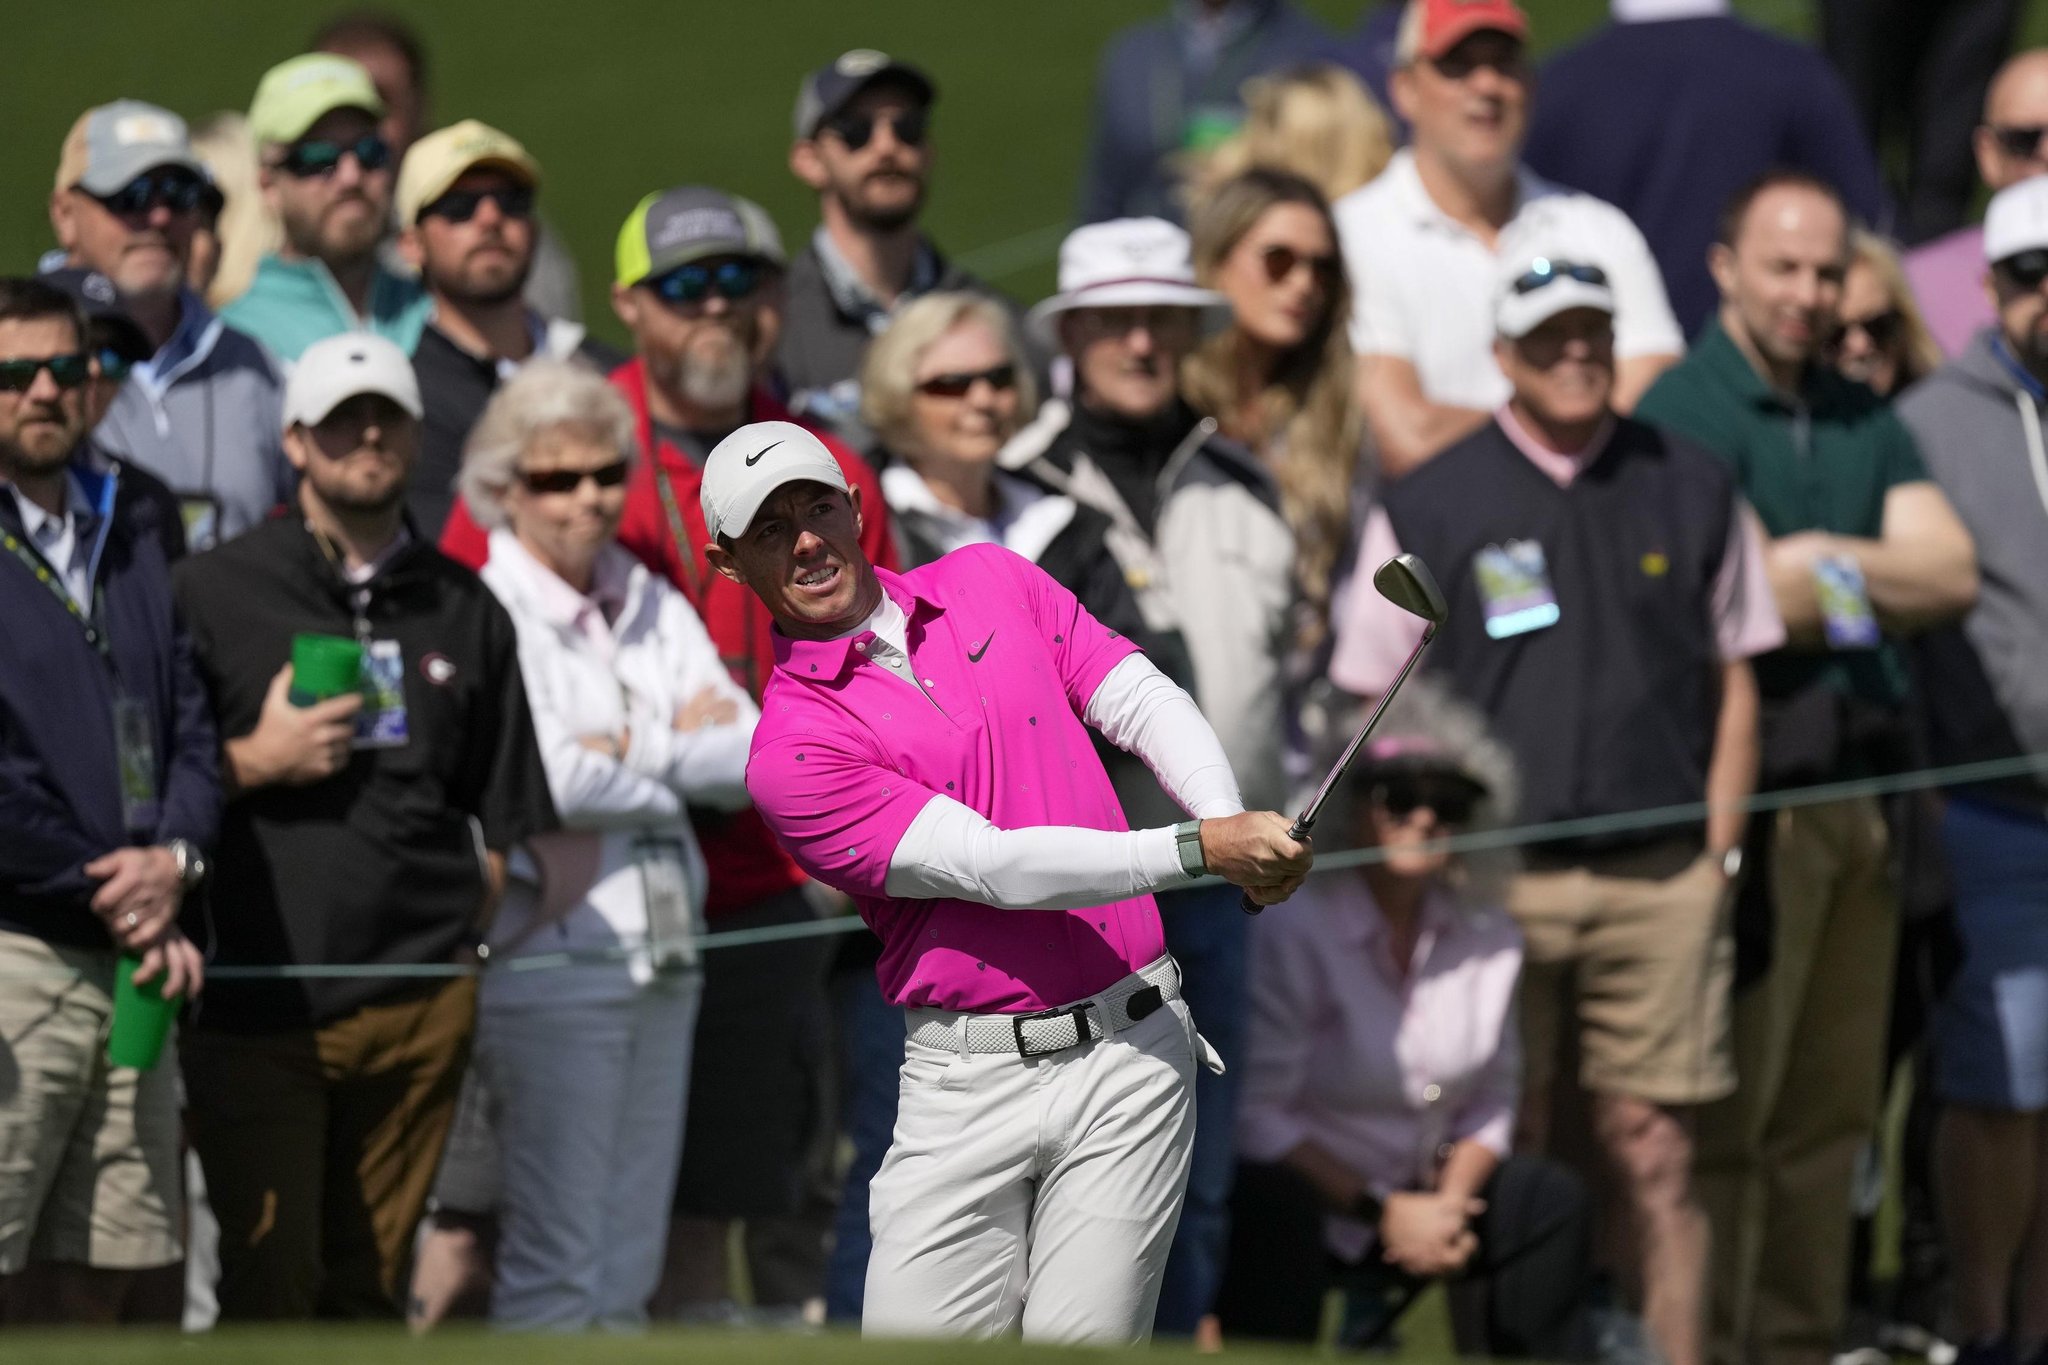 Rory McIlroy in confident mood after battling second round at Augusta National